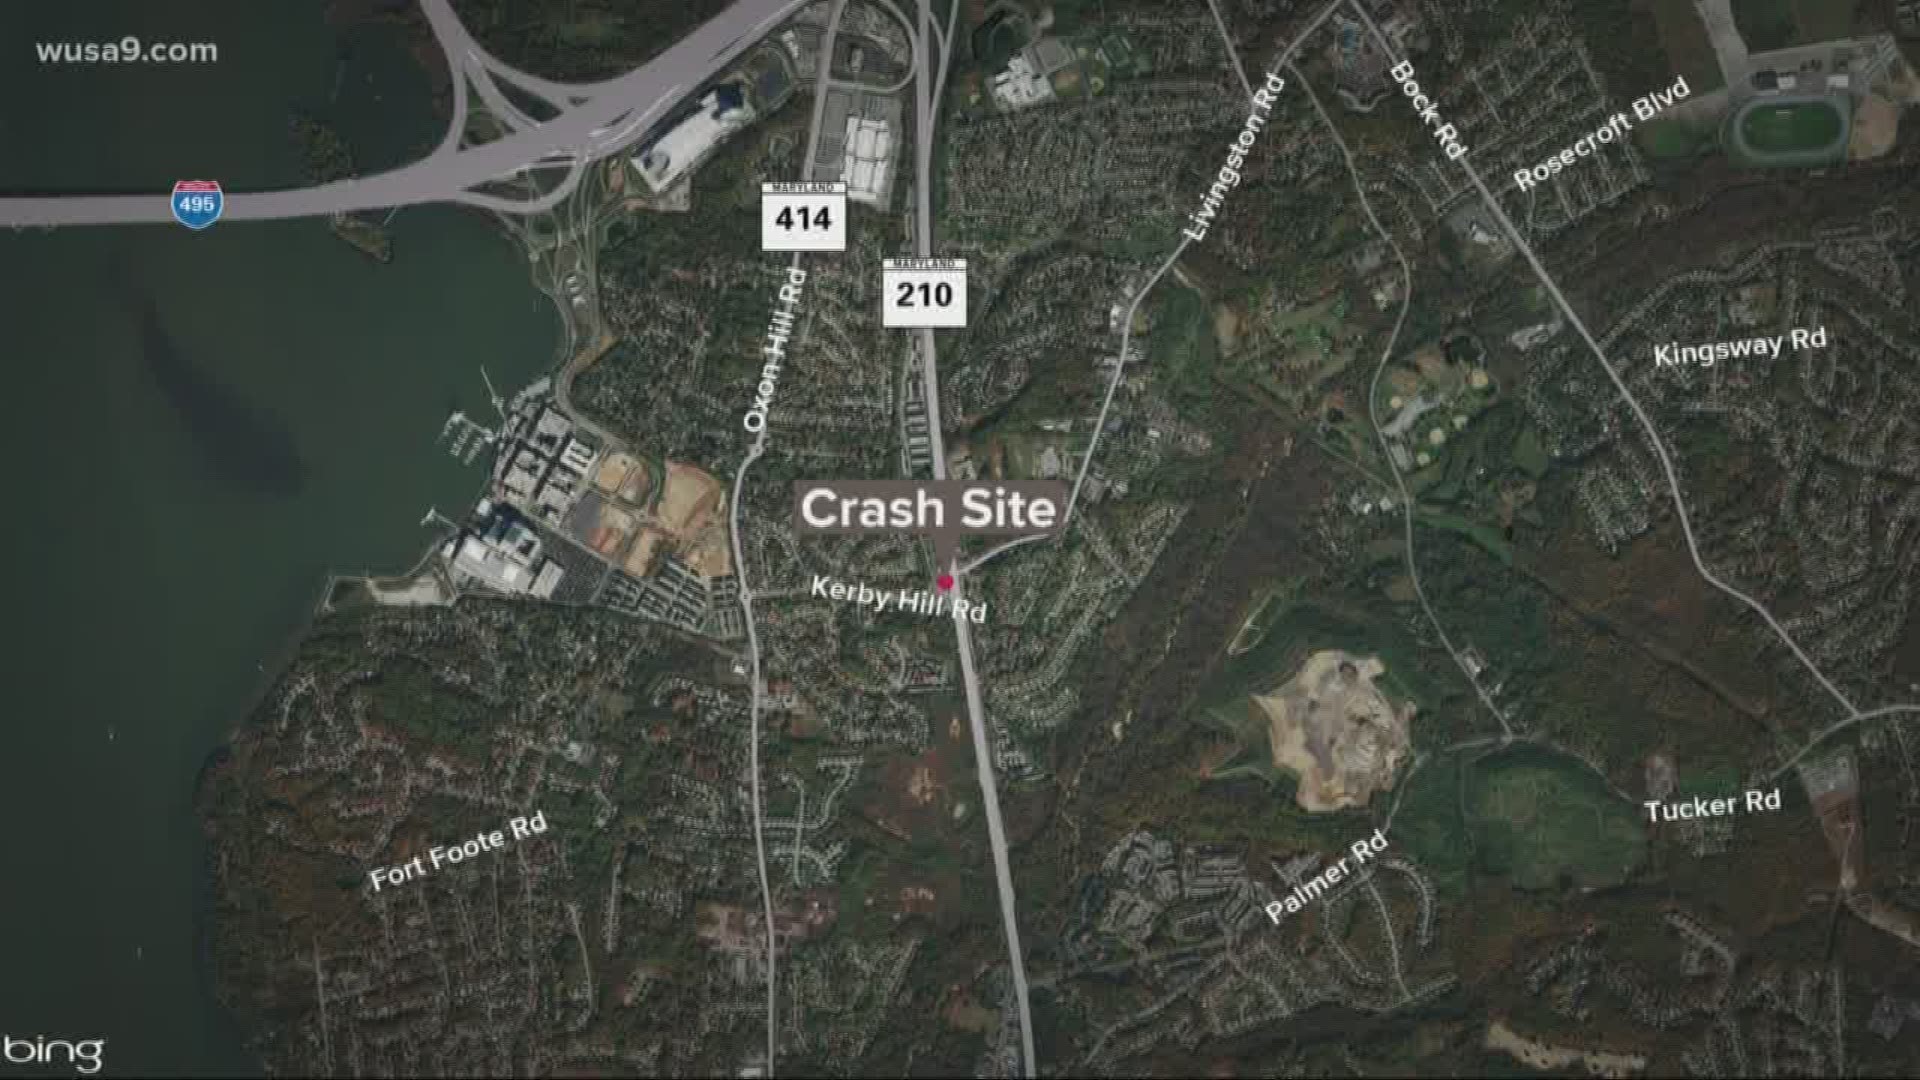 The horrible deaths of three kids this week in what appears to be a drunk driving crash on Indian Head highway in Fort Washington, Md. has renewed the concern about safety on that major thoroughfare.